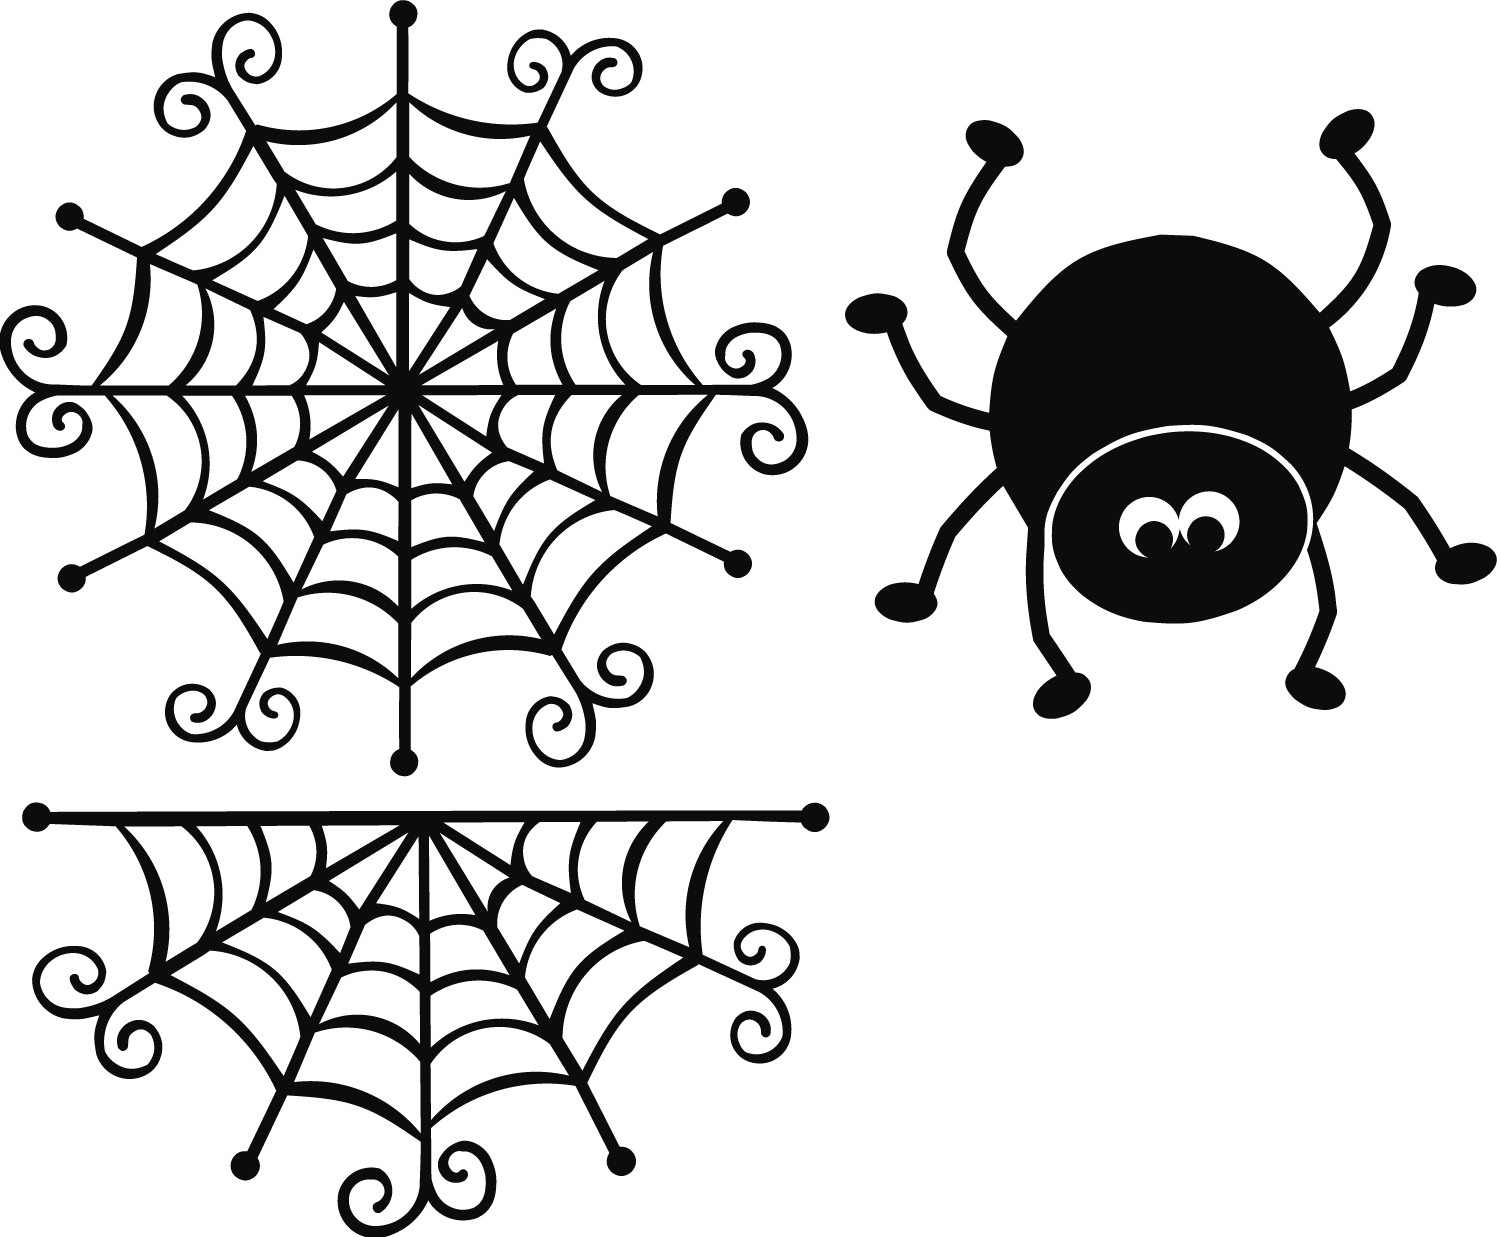 free-printable-spider-web-coloring-pages-for-kids-spiderman-web-geometric-coloring-pages